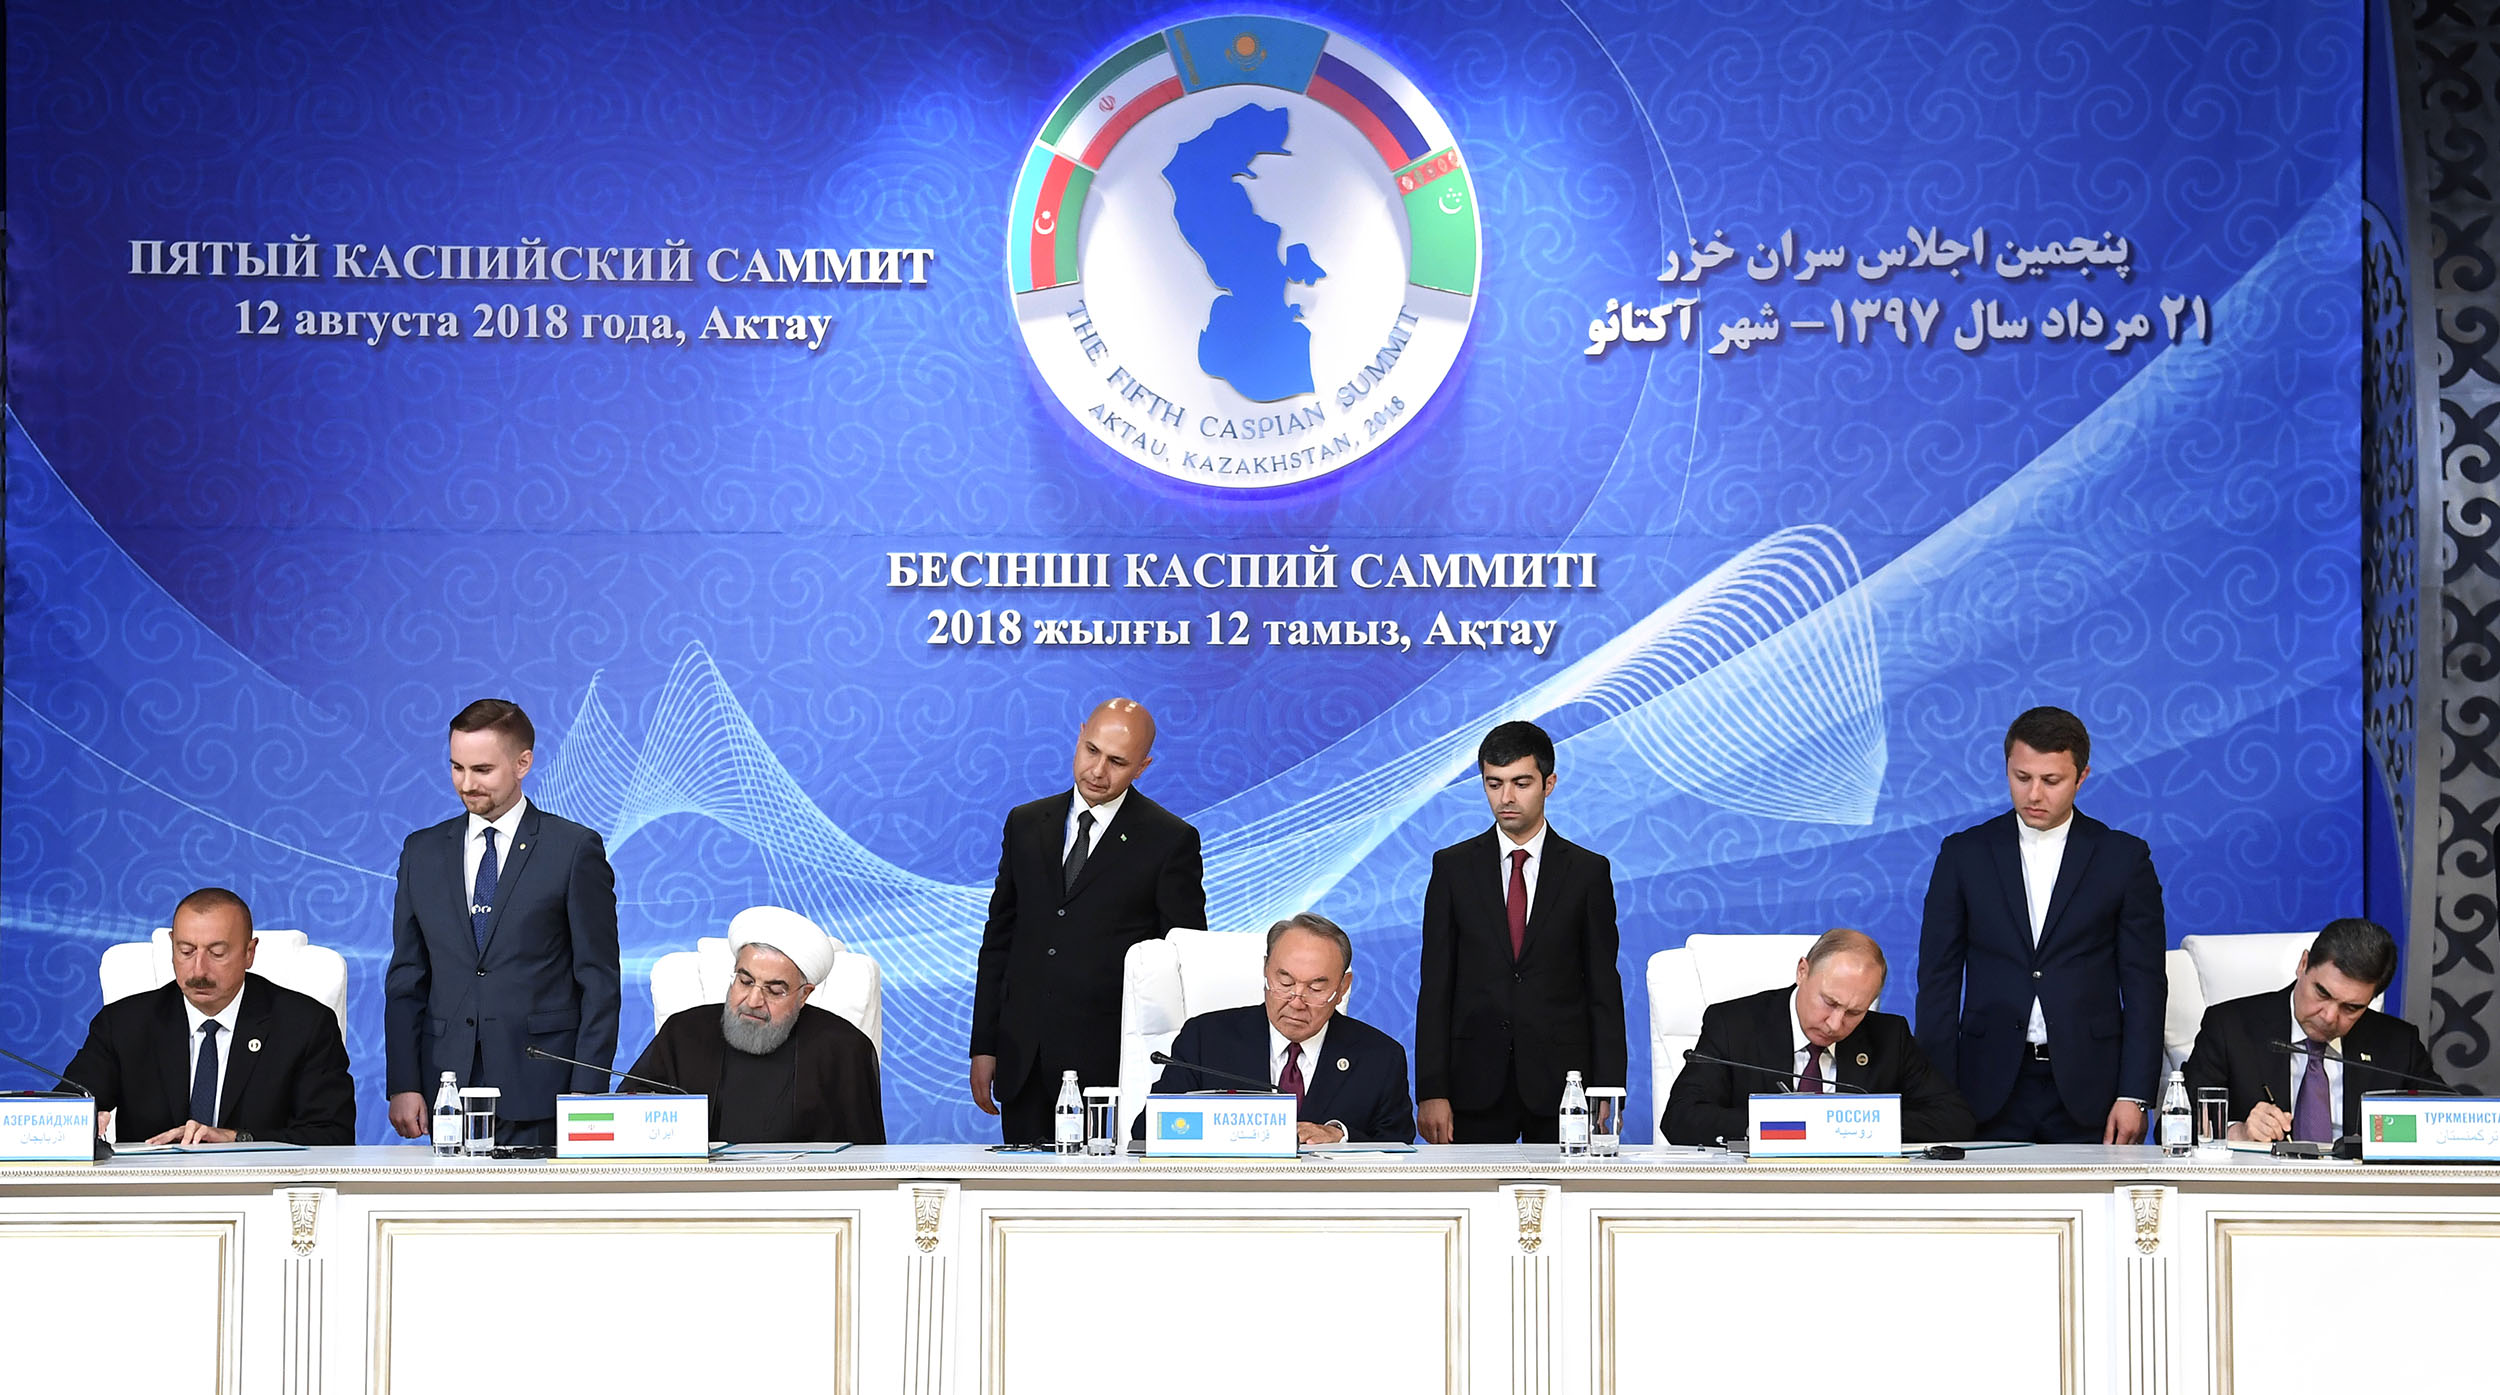 Convention on the Legal Status of the Caspian Sea inked